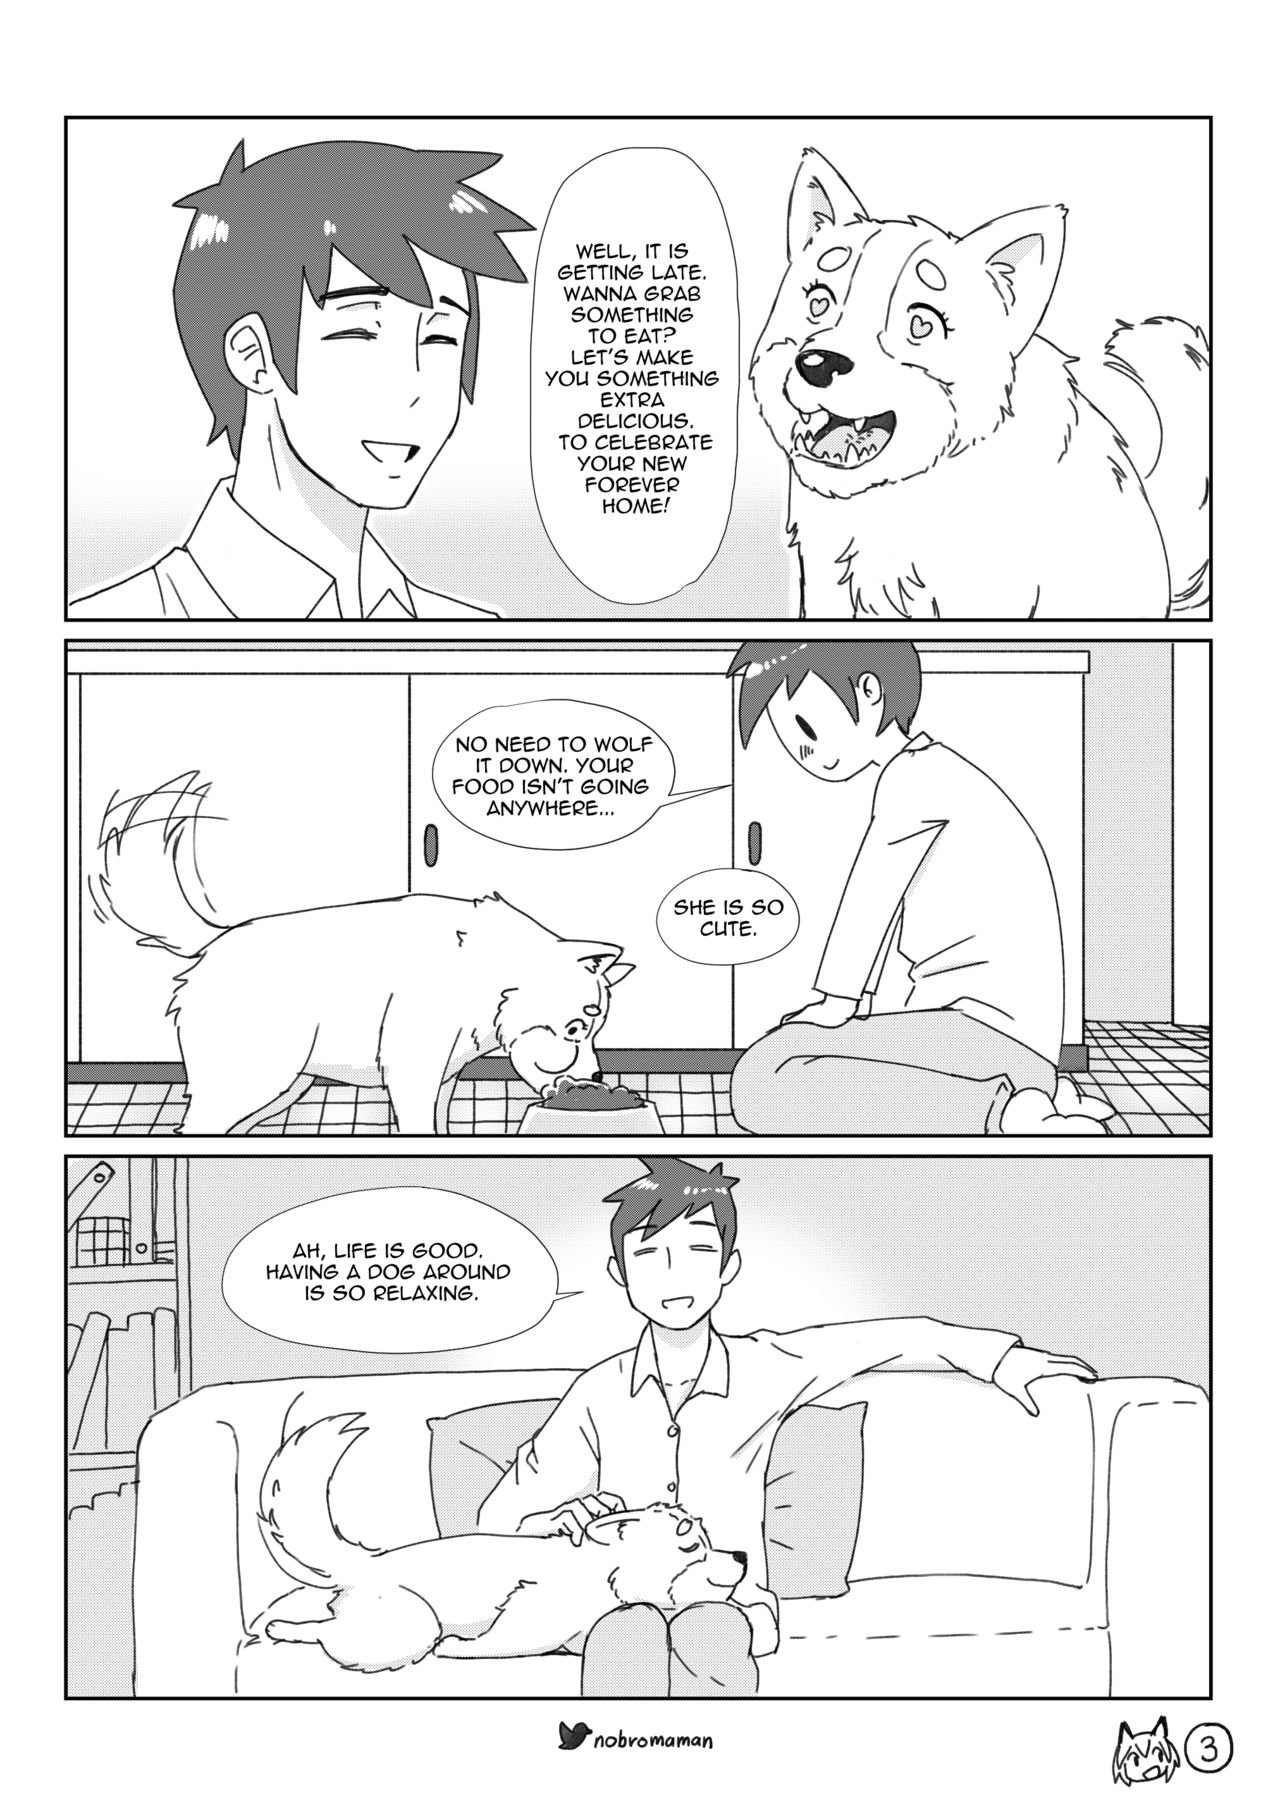 Life with a dog girl - Chapter1 (ongoing) 3